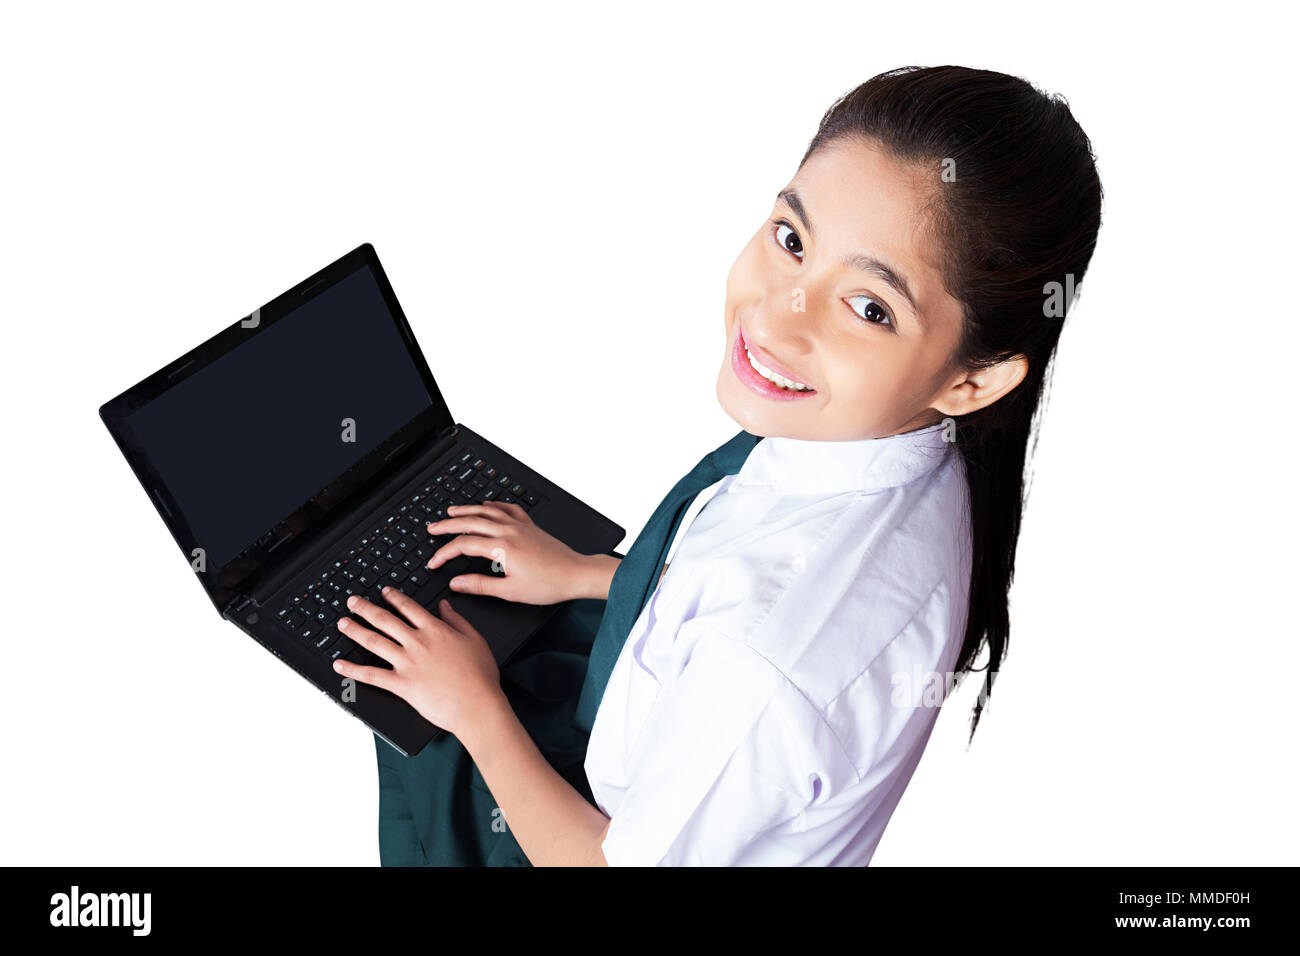 Smiling One Teenage School Girl Student Using Laptop Study E-Learning Stock Photo